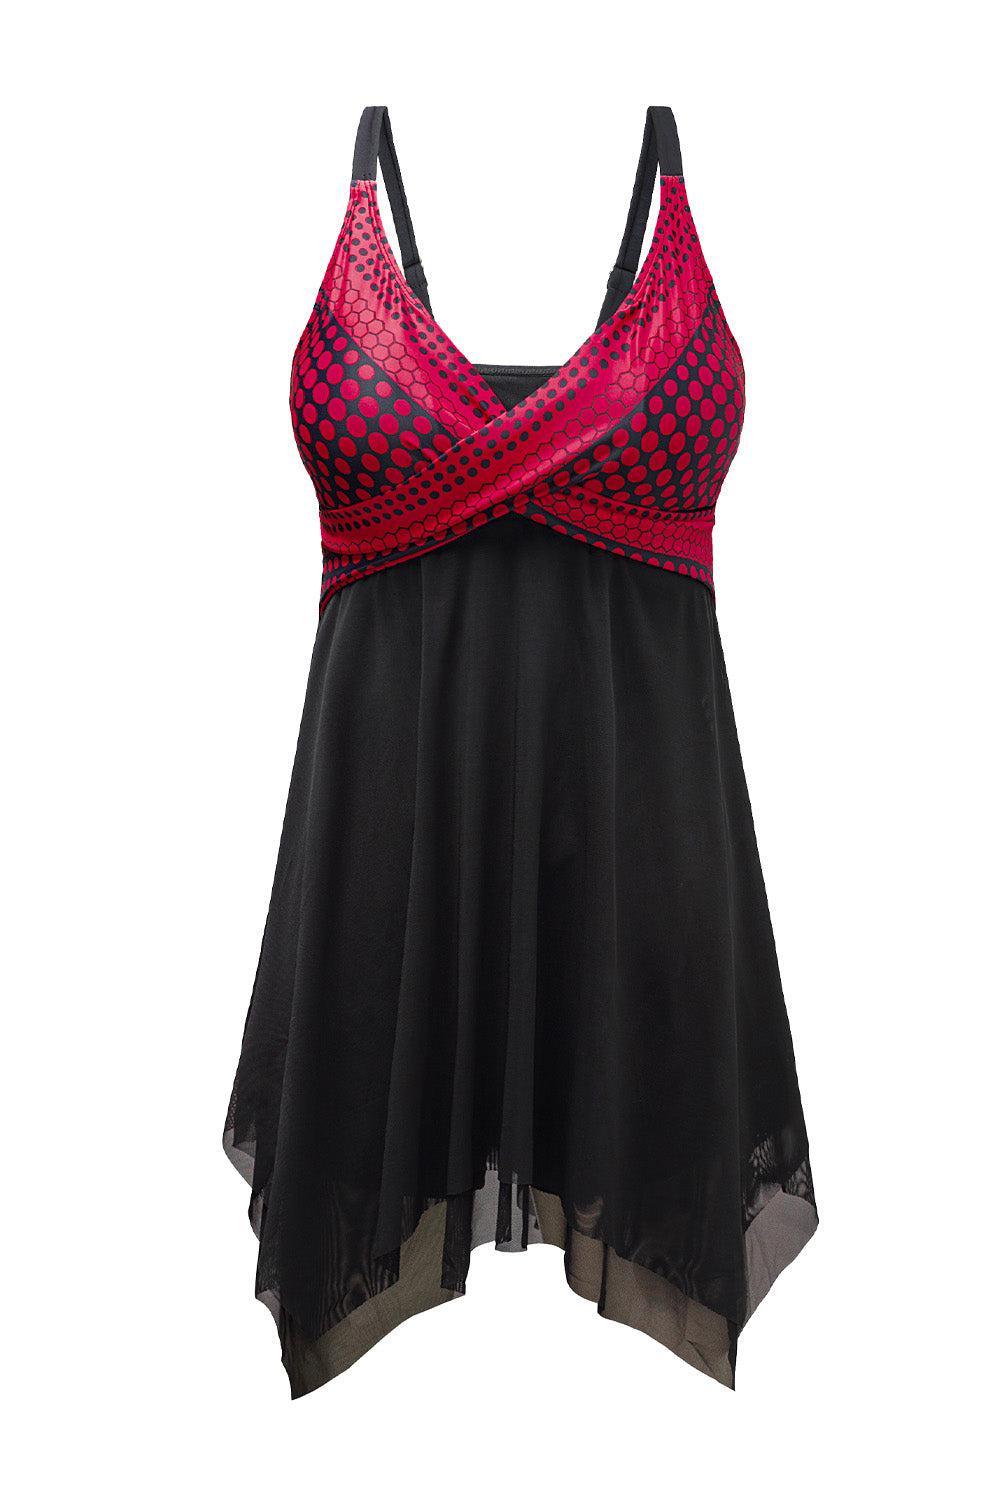 a women's tank top with a red and black design